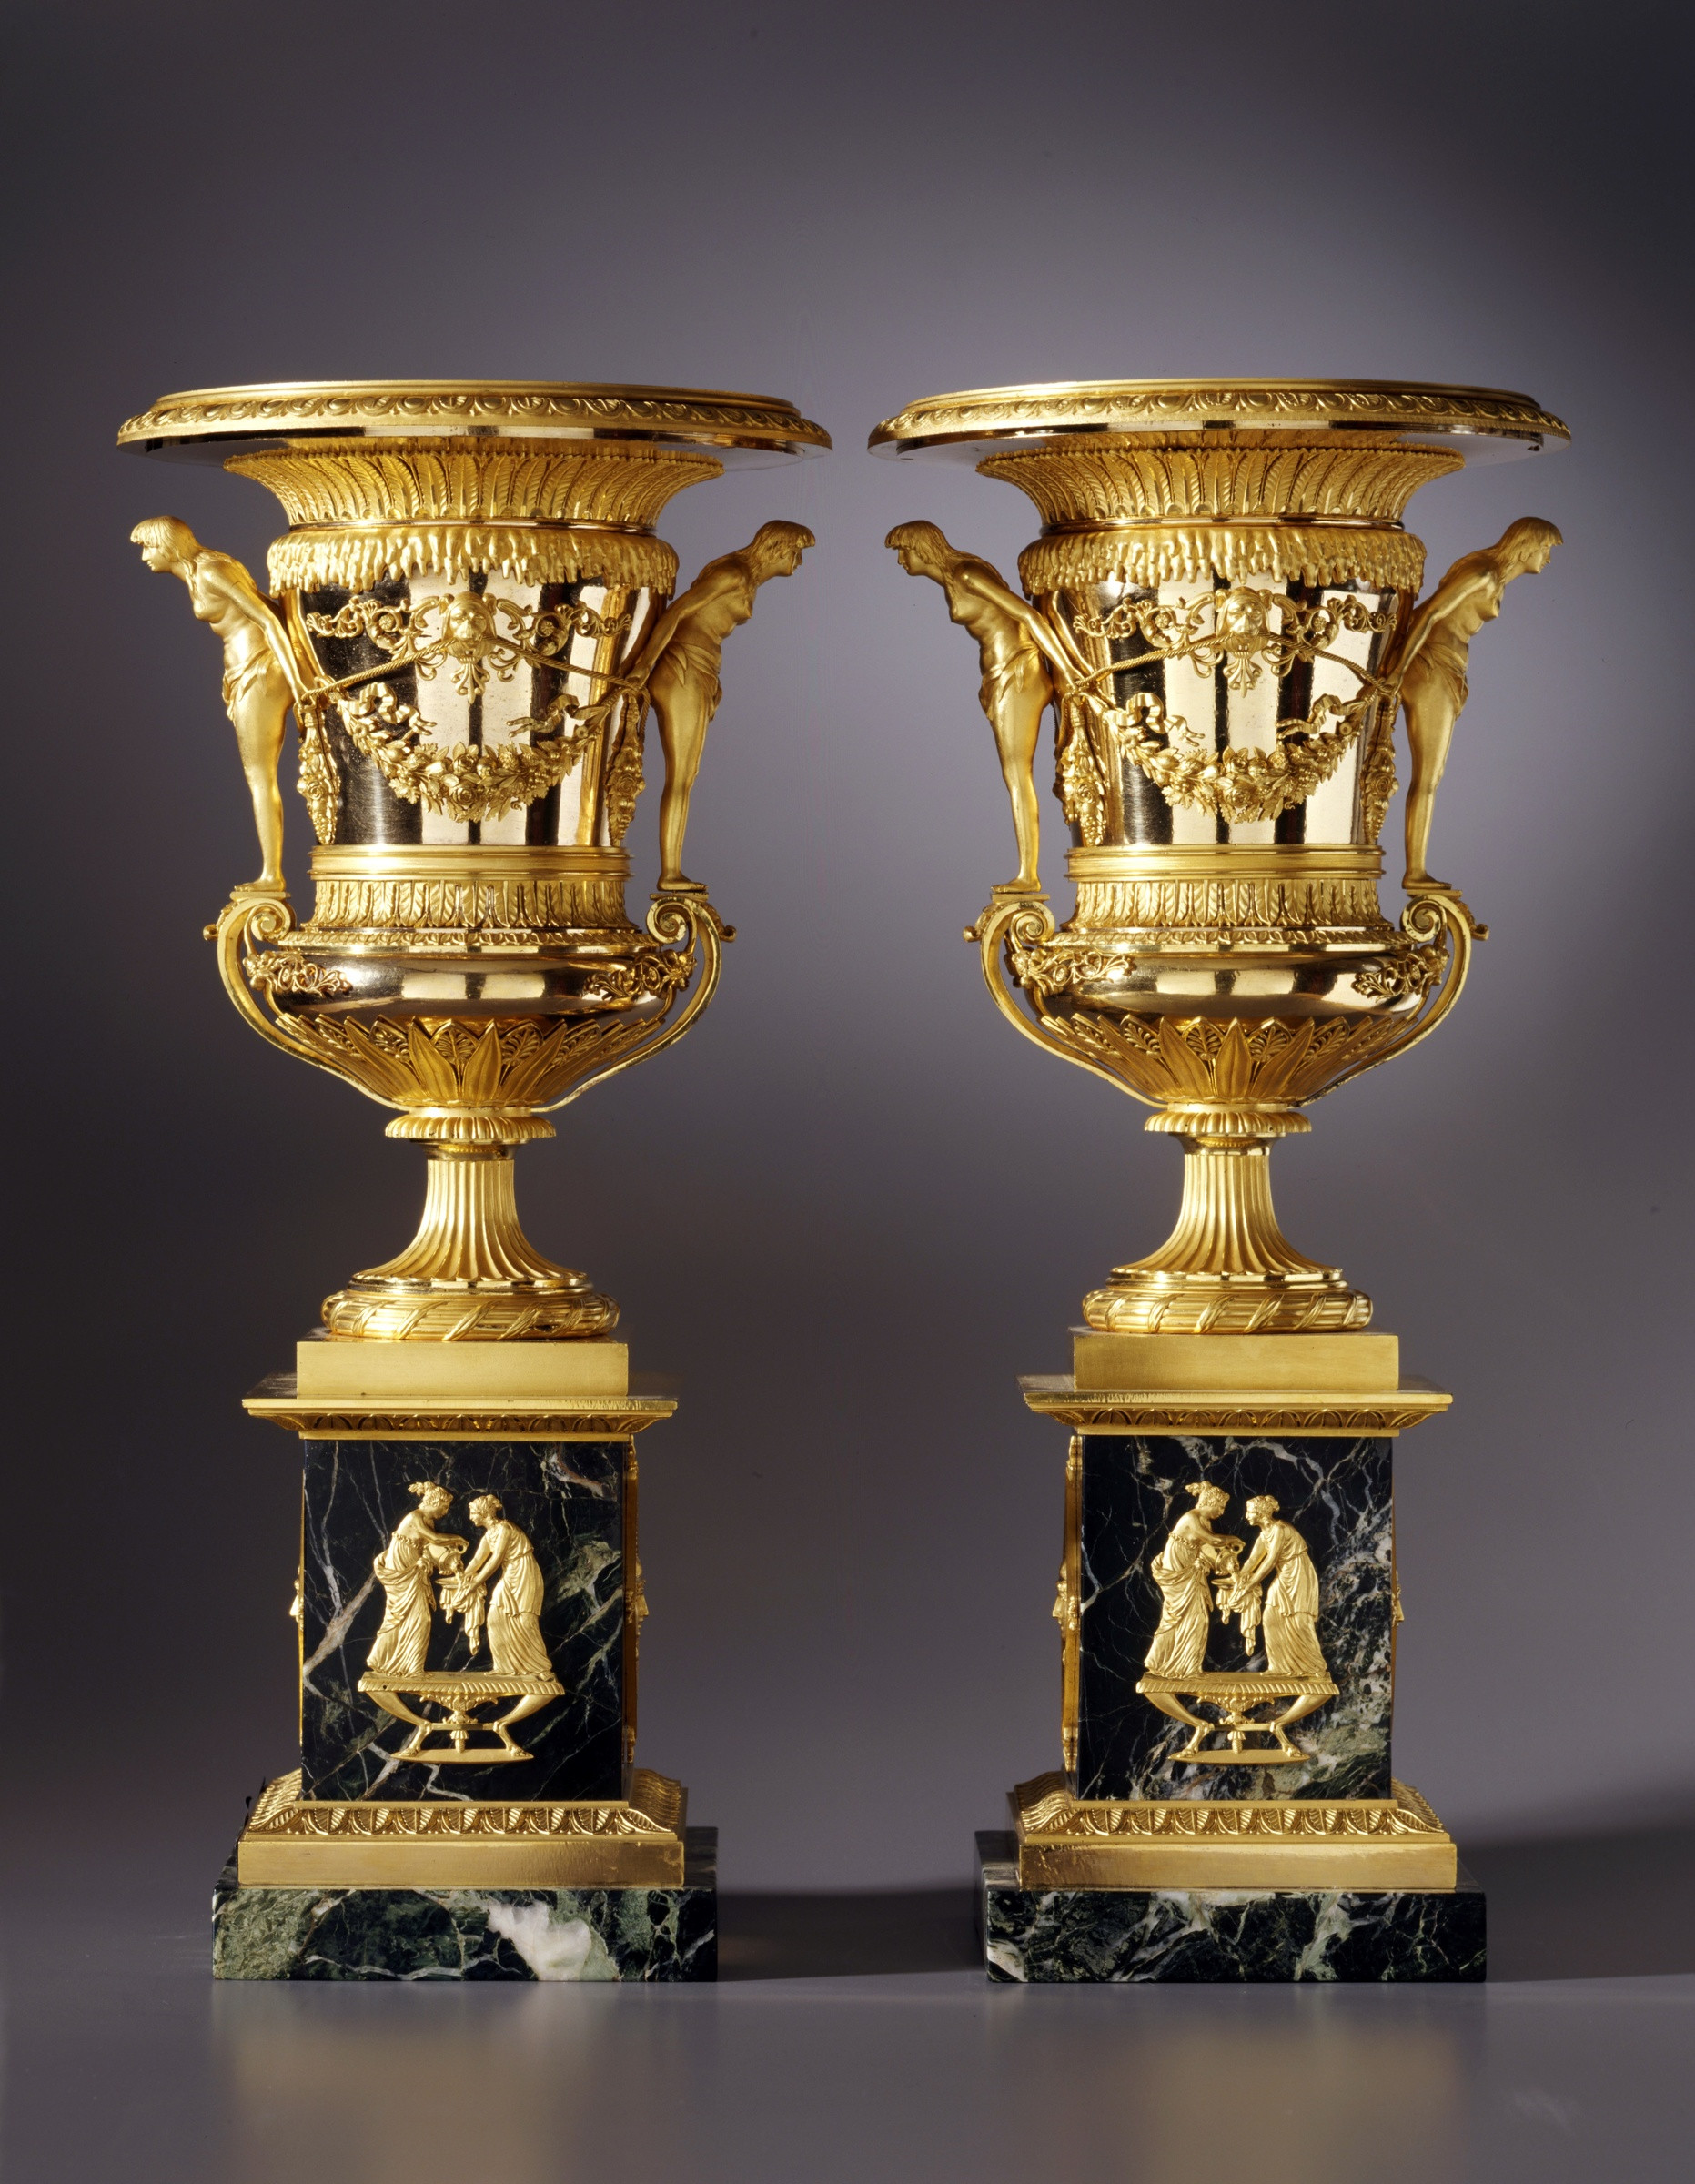 22 attractive Diamond Shaped Vase 2024 free download diamond shaped vase of friedrich bergenfeldt attributed to a pair of large sized st with regard to a pair of large sized st petersburg empire vases attributed to friedrich bergenfeldt